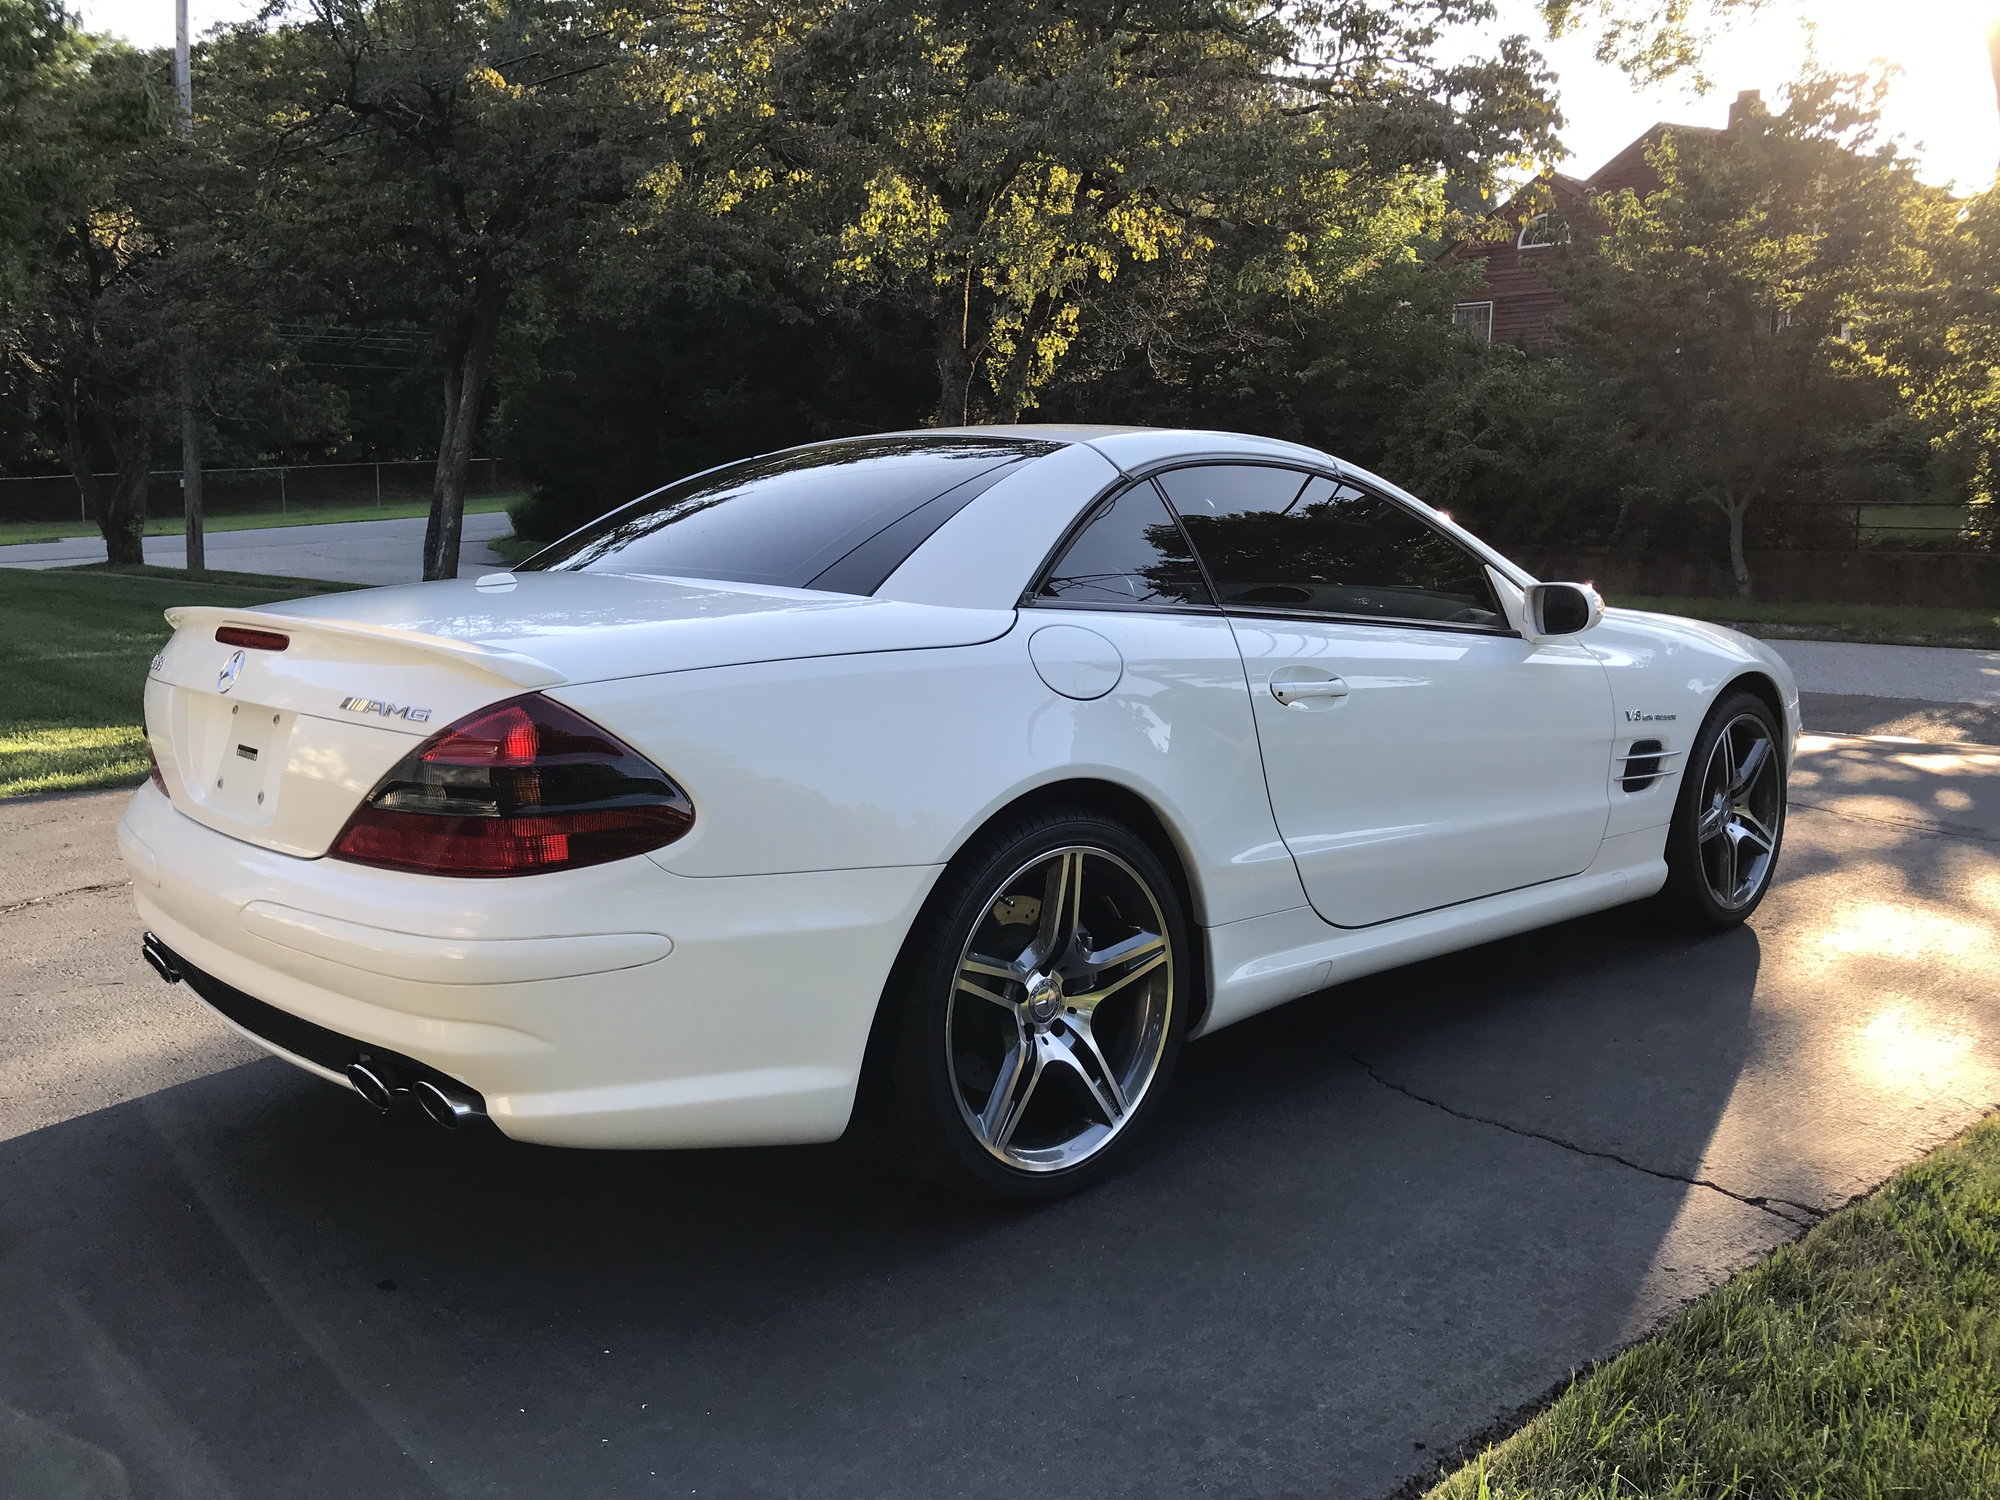 2005 Mercedes-Benz SL55 AMG -24,000 miles -Like New - Obsessively Maintained -$43,000 - MBWorld ...